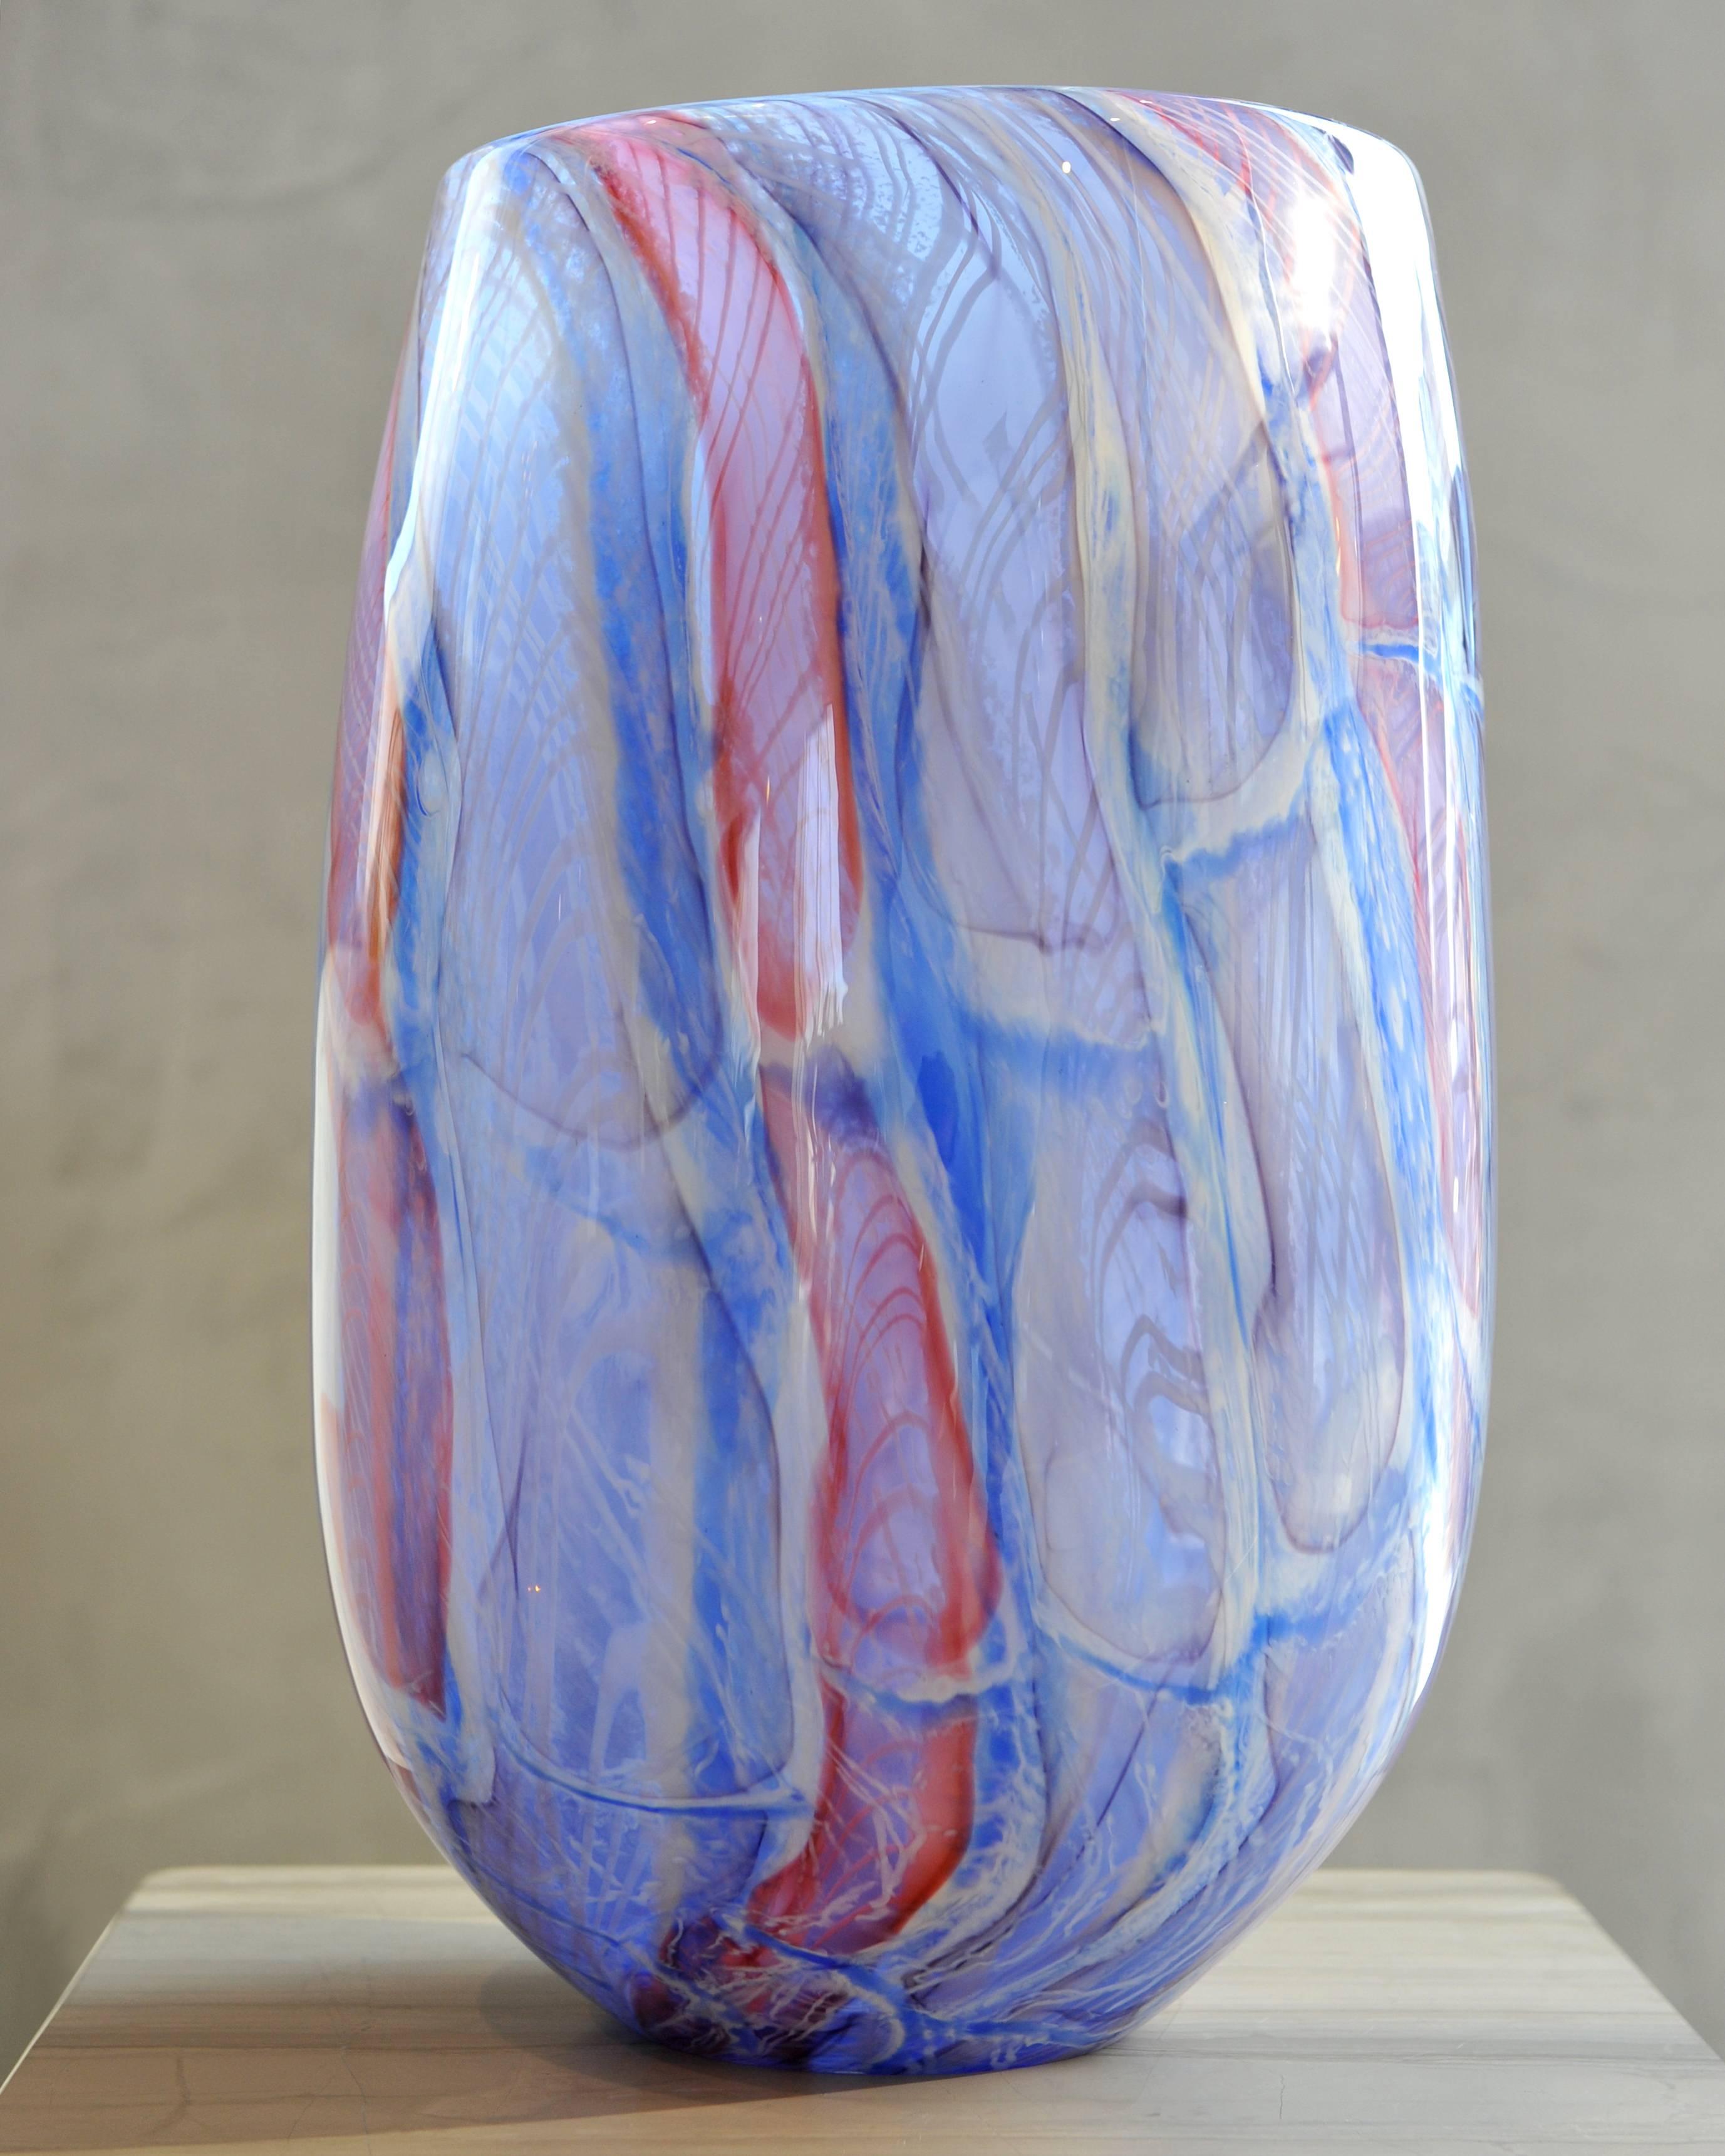 Richard Price Abstract Sculpture - Blown glass tall vase. Murano glass style colors purple, blue, red and white